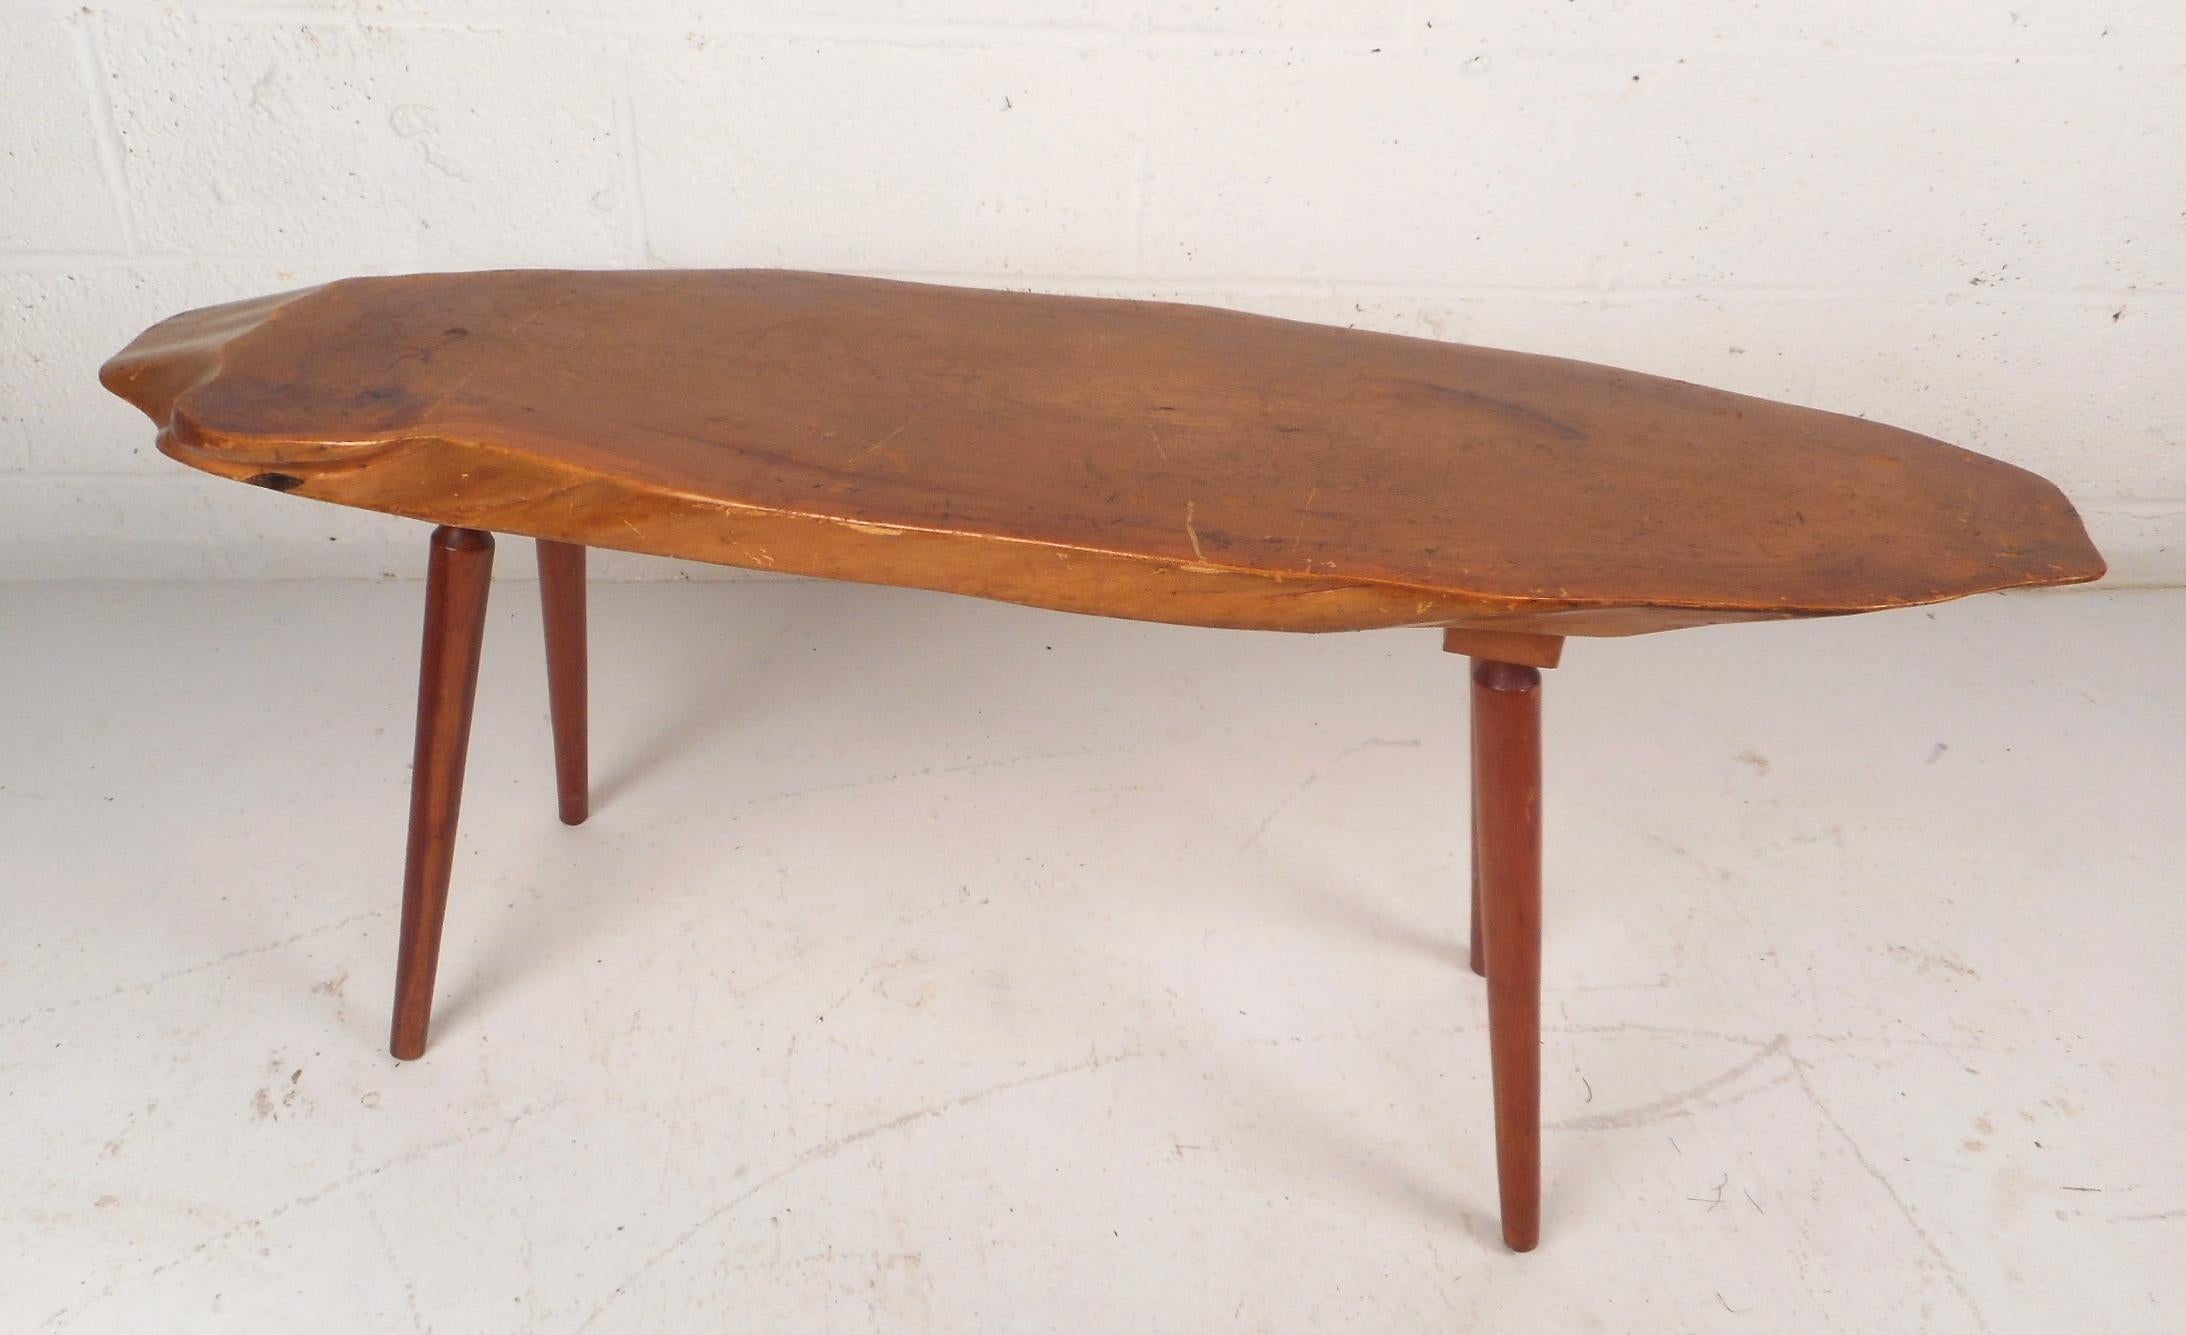 This gorgeous vintage modern coffee table features a live edge tree slab top with tapered legs. Unique design offers a sturdy and stylish place to set items in any modern interior. Please confirm item location (NY or NJ).